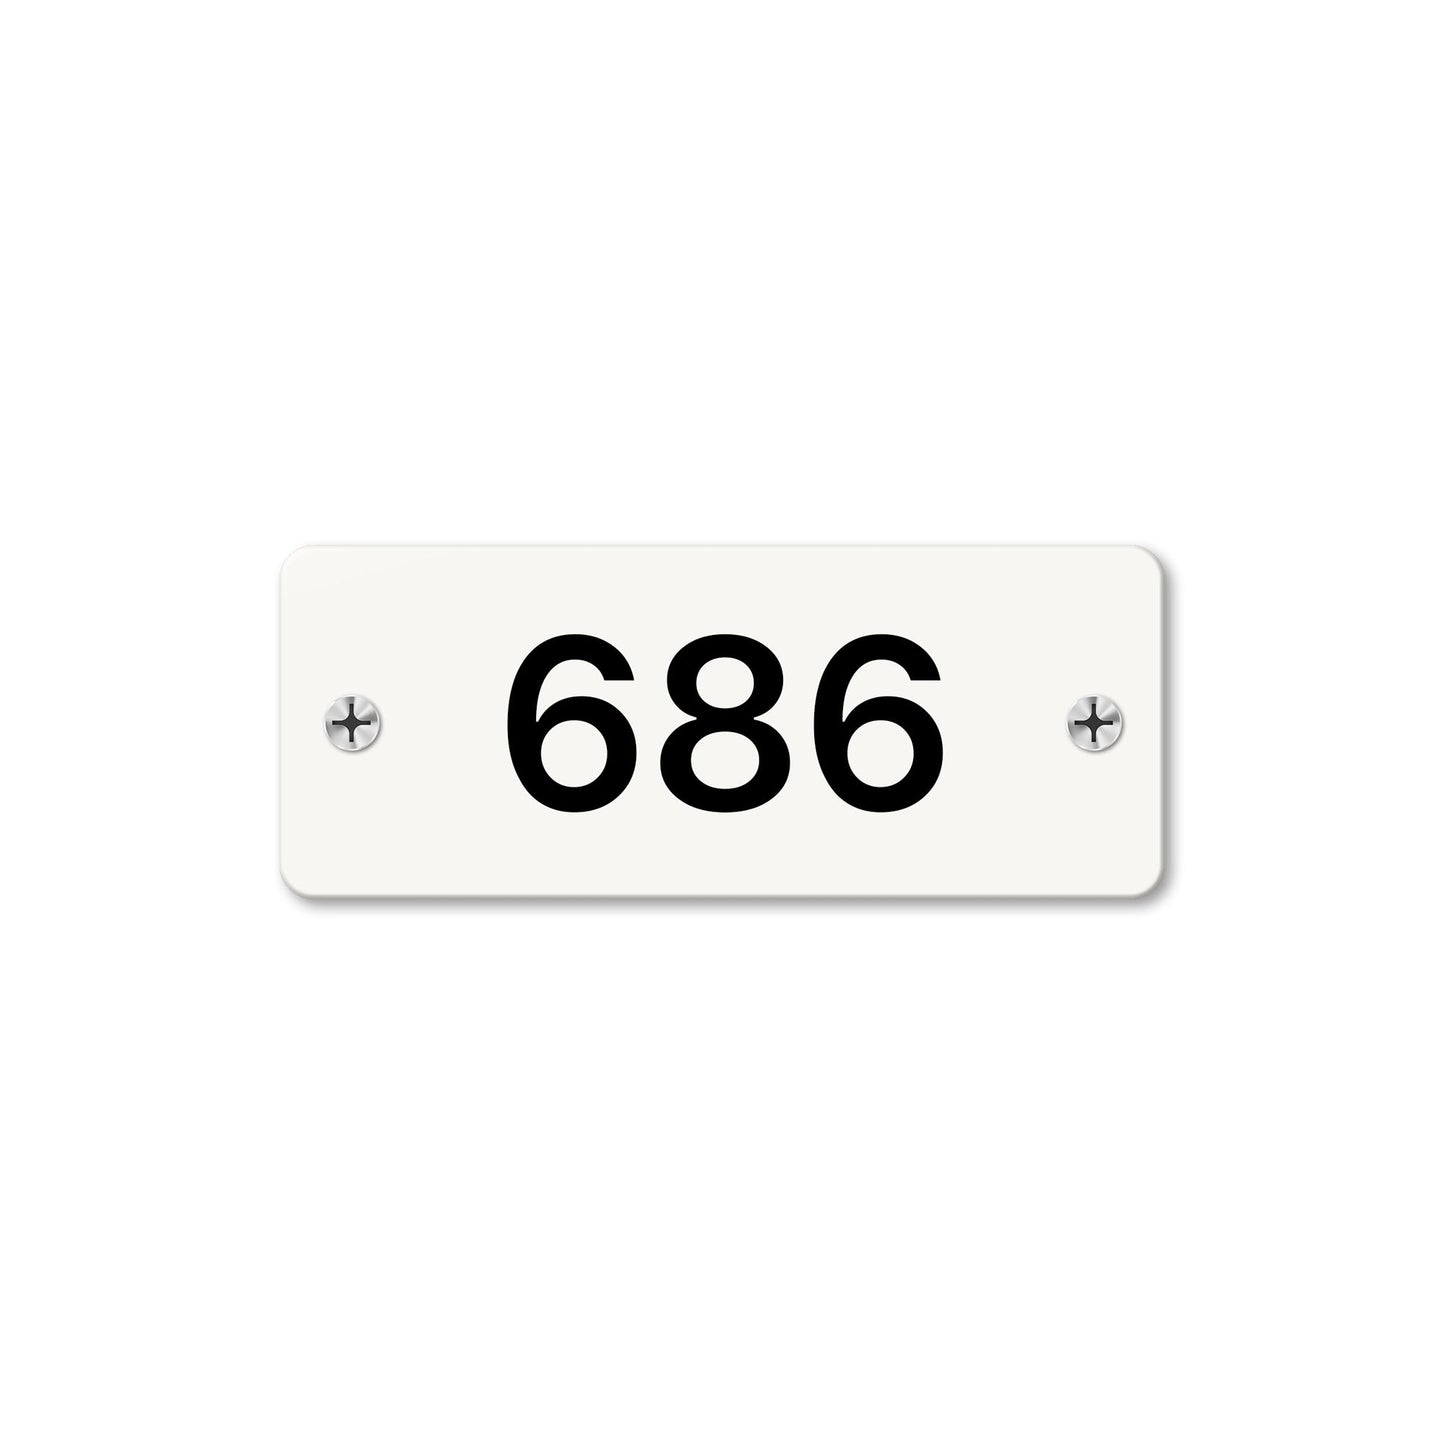 Numeral 686